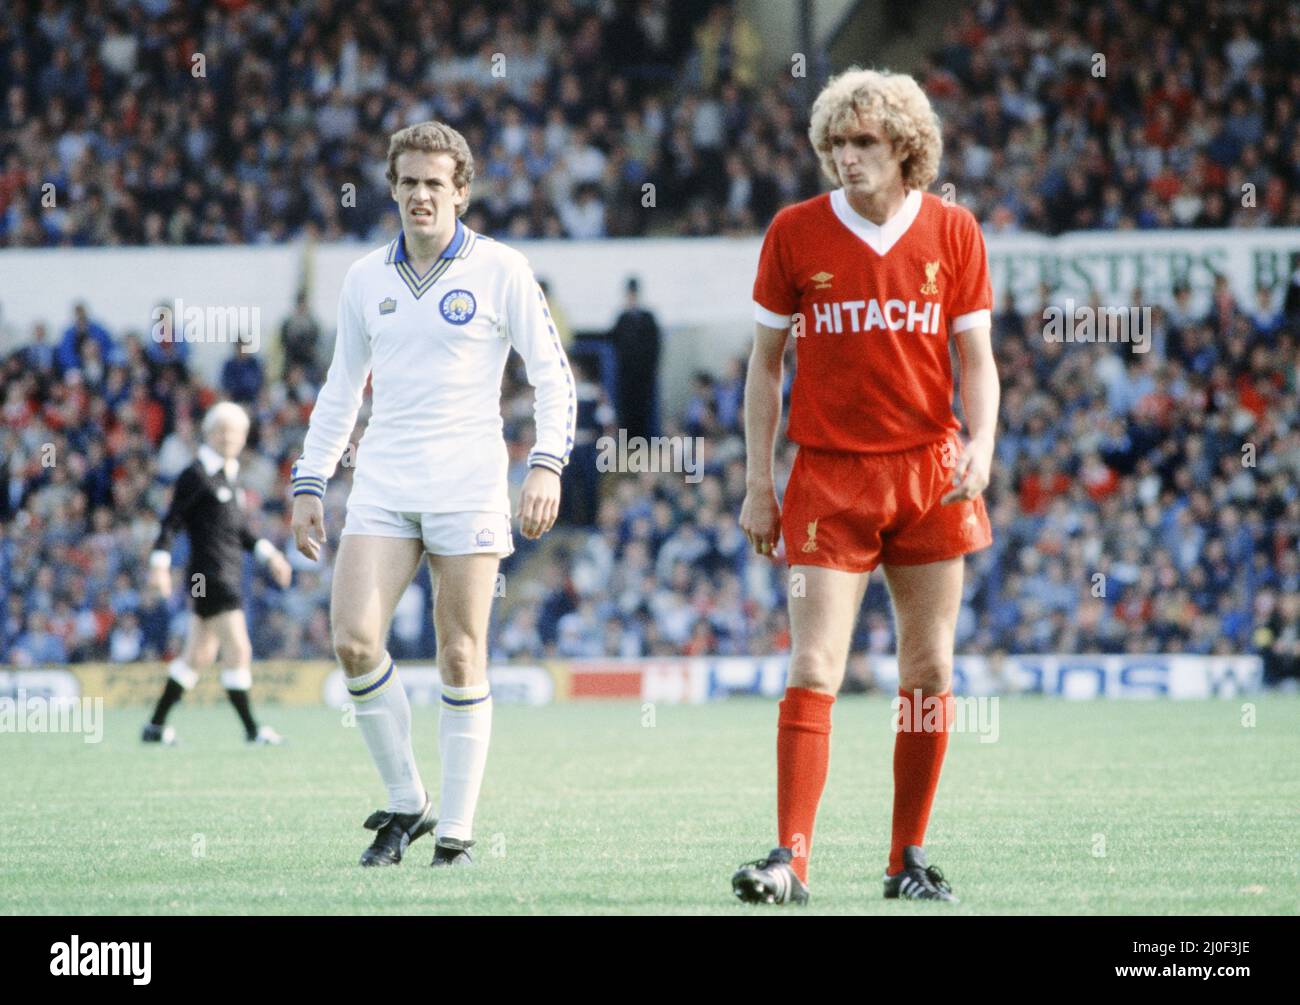 English League Division One match at  Elland Road.  Leeds United 1 v Liverpool 1. Alan Curtis of Leeds (left) with Phil Thompson of Liverpool, wearing the new Hitachi sponsored strip.  15th September 1979. Stock Photo